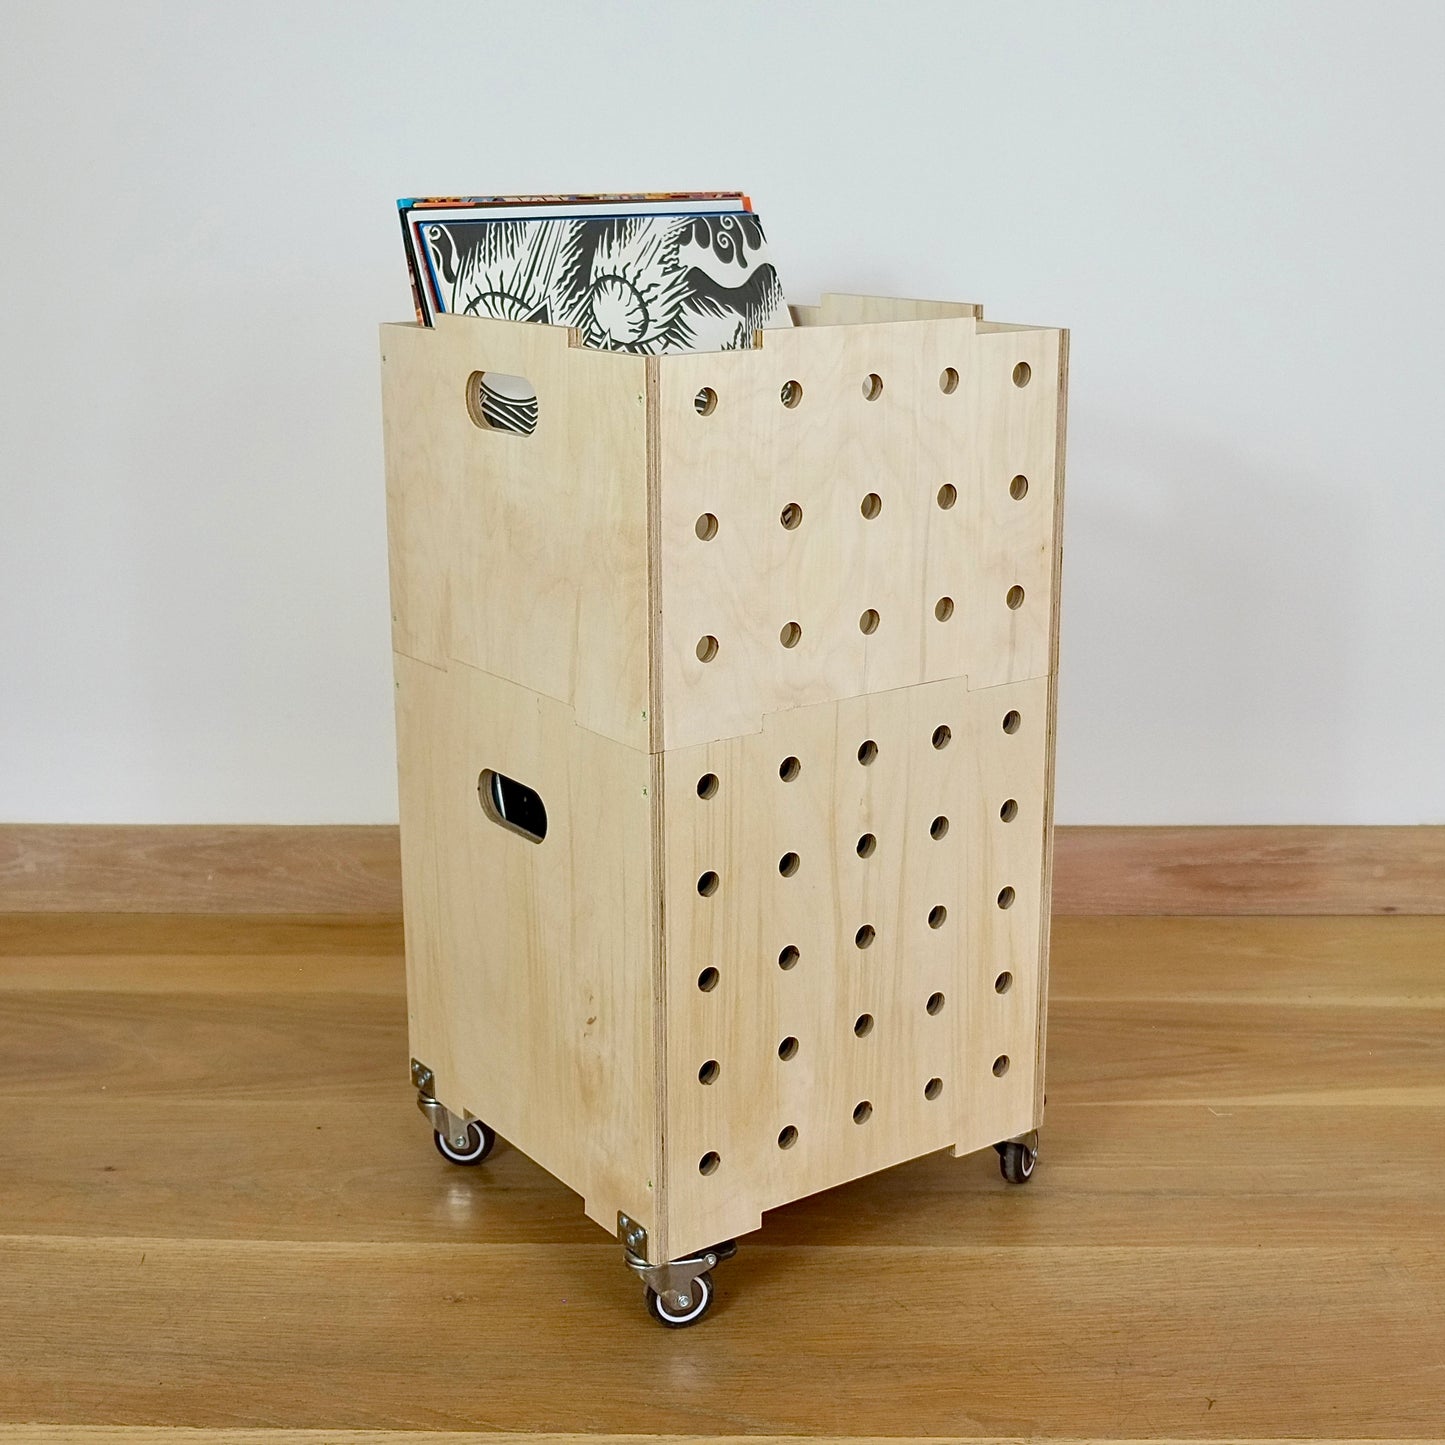 Open topped set of 2 pale wood birch ply stackable square crates with 5 vertical rows of holes on one side & hand holes on the other. It sits on 4 castors & holds a selection of vinyl records whilst standing on a wood floor with a white wall behind